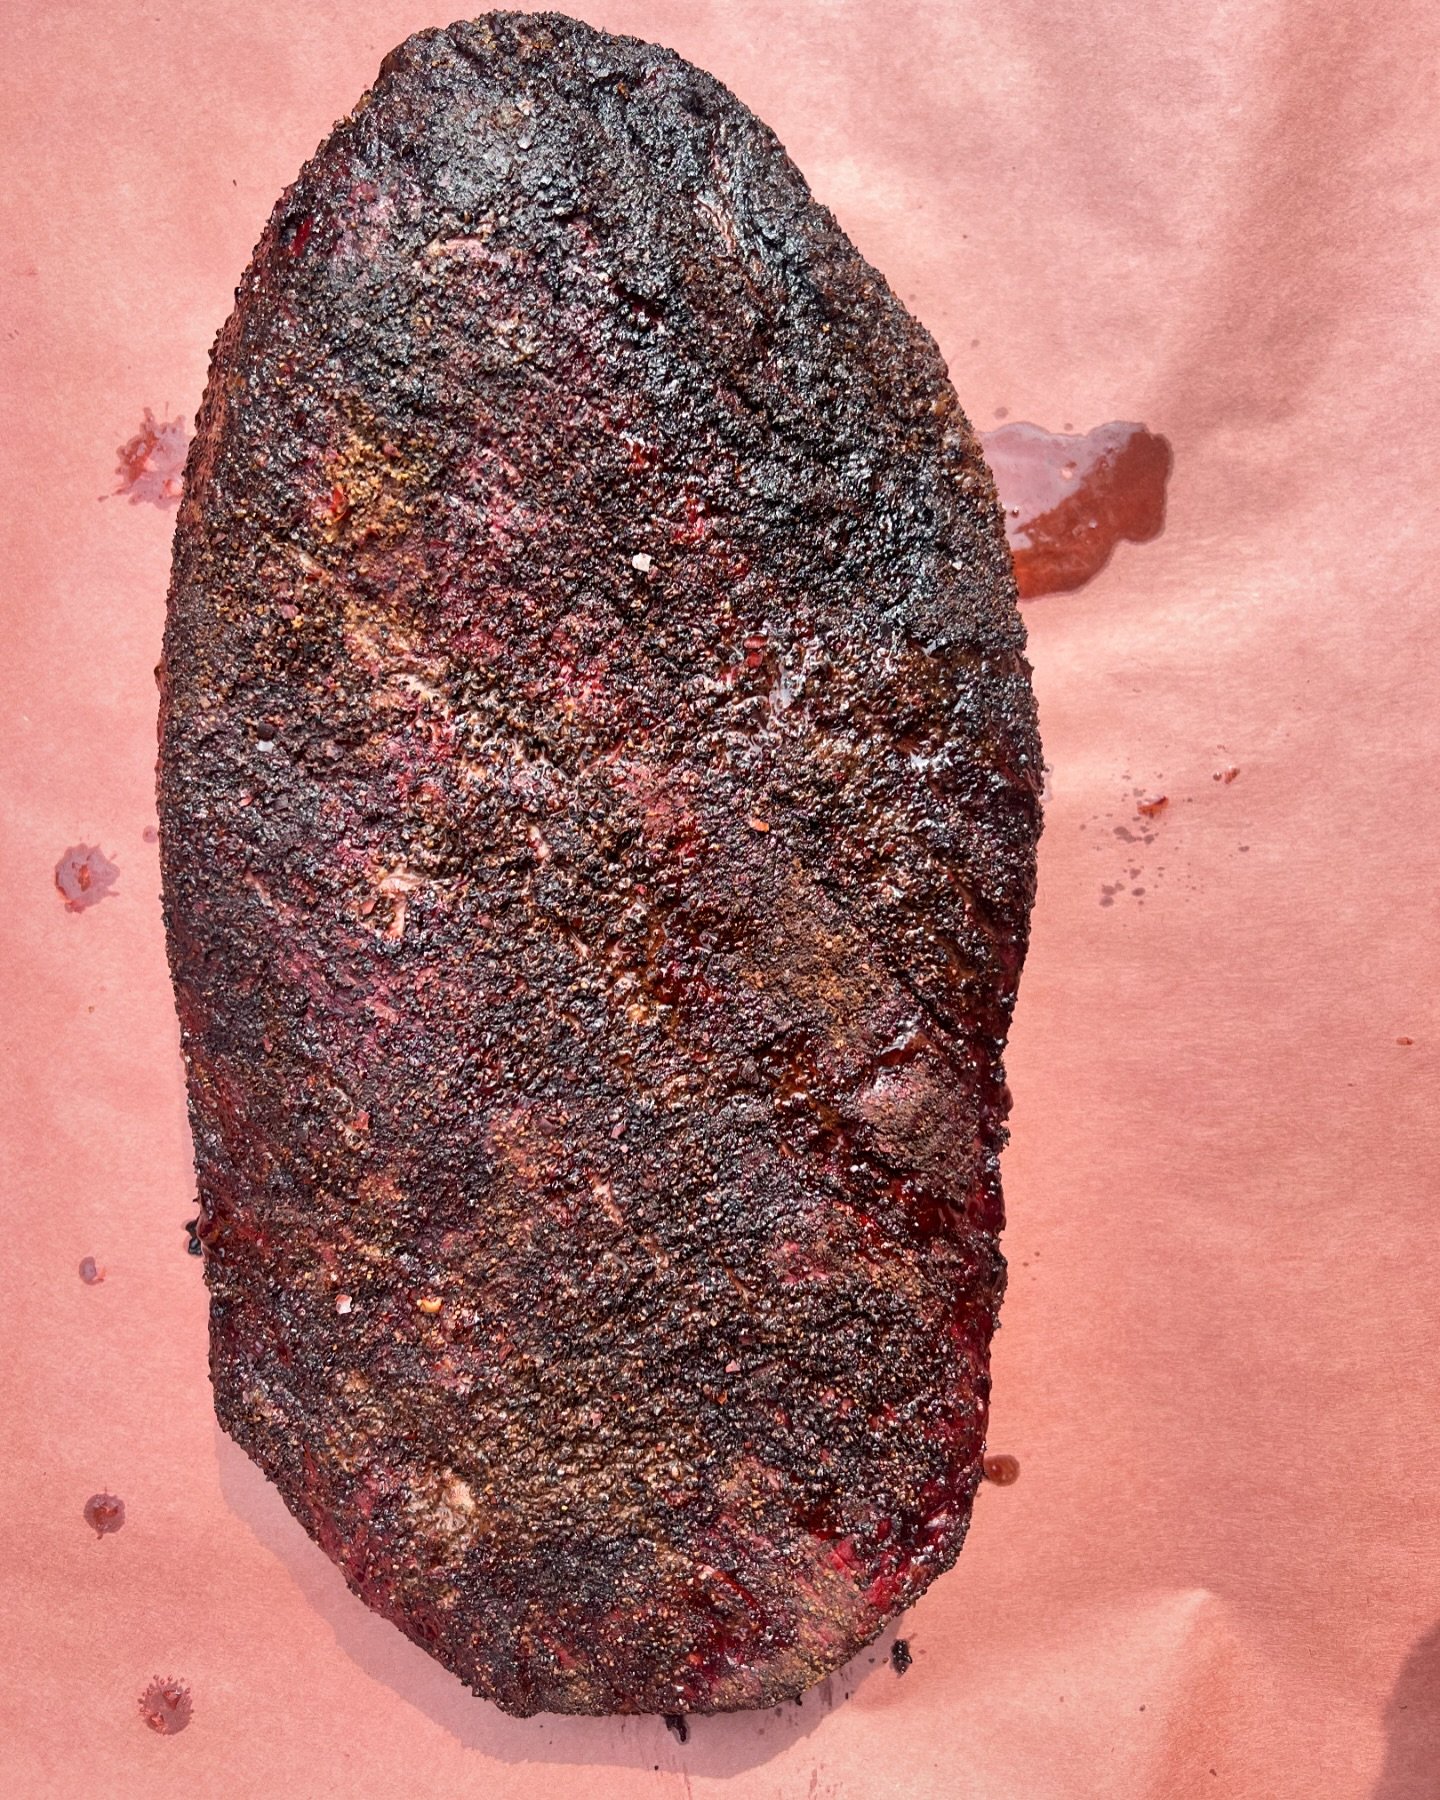 Brisket, ready to be wrapped for the finish!

#bbq #pitmaster #brisket #beef #meat #eat